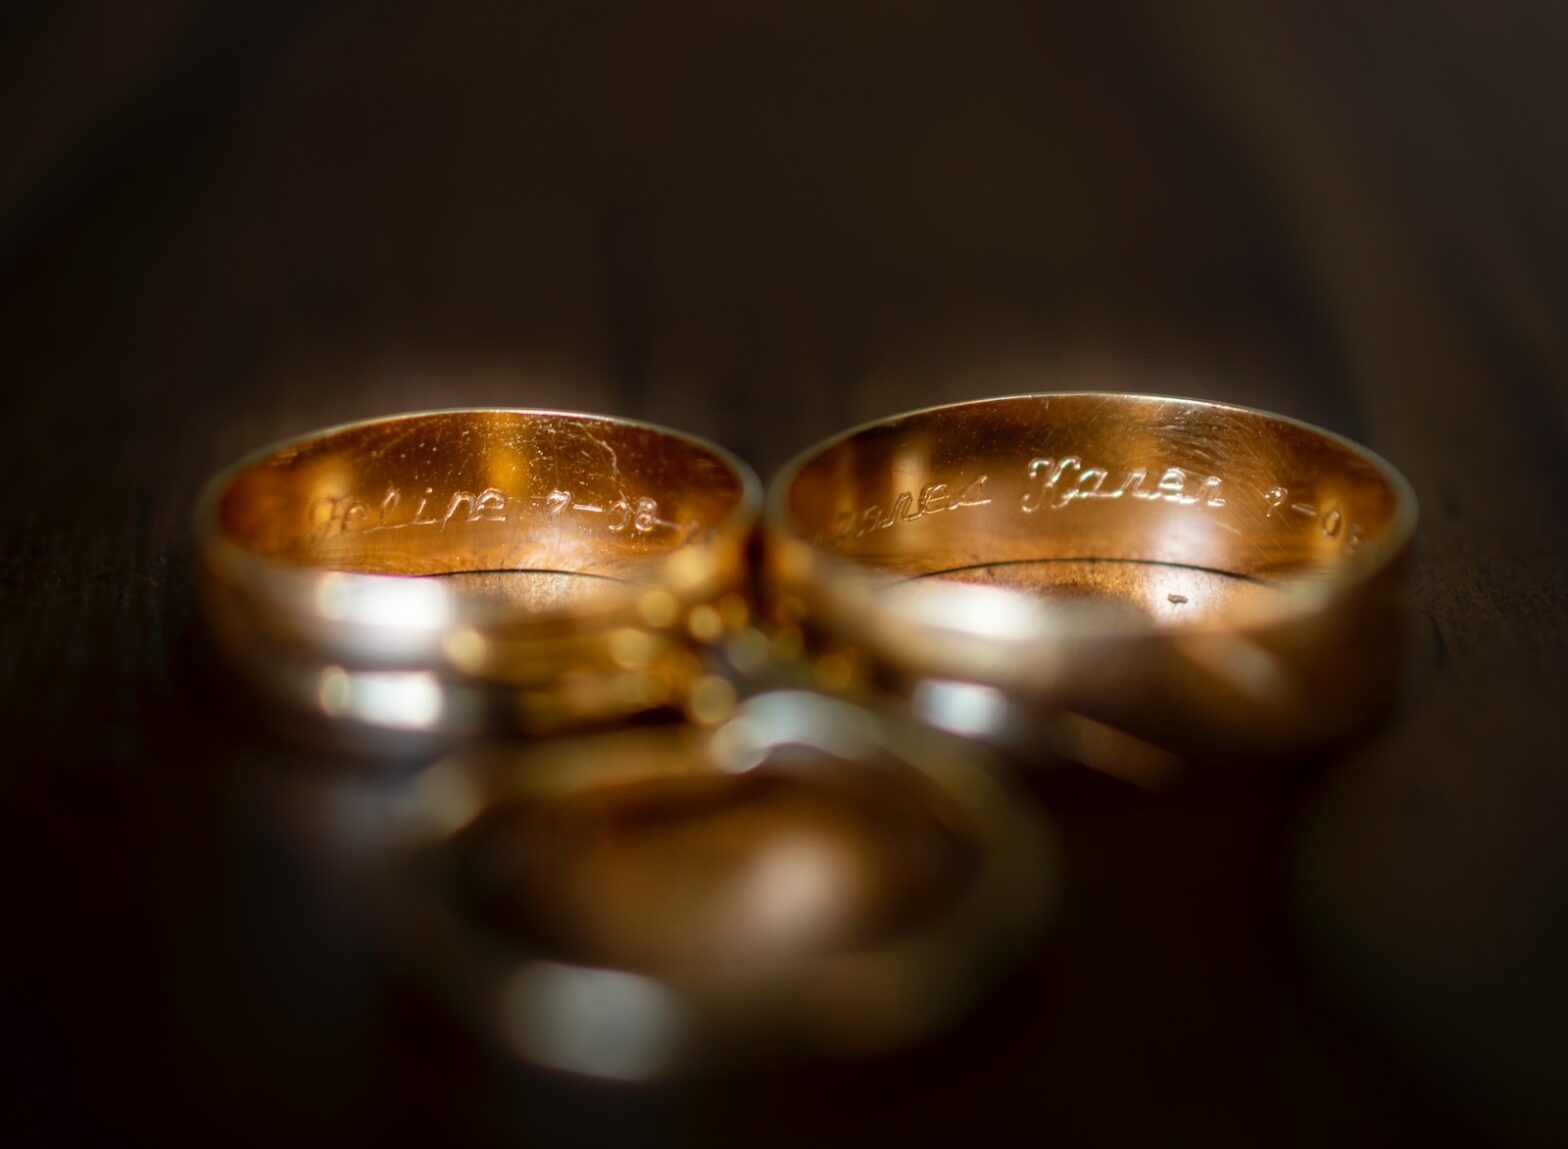 pair of gold-colored wedding band. can you sleep with rings on